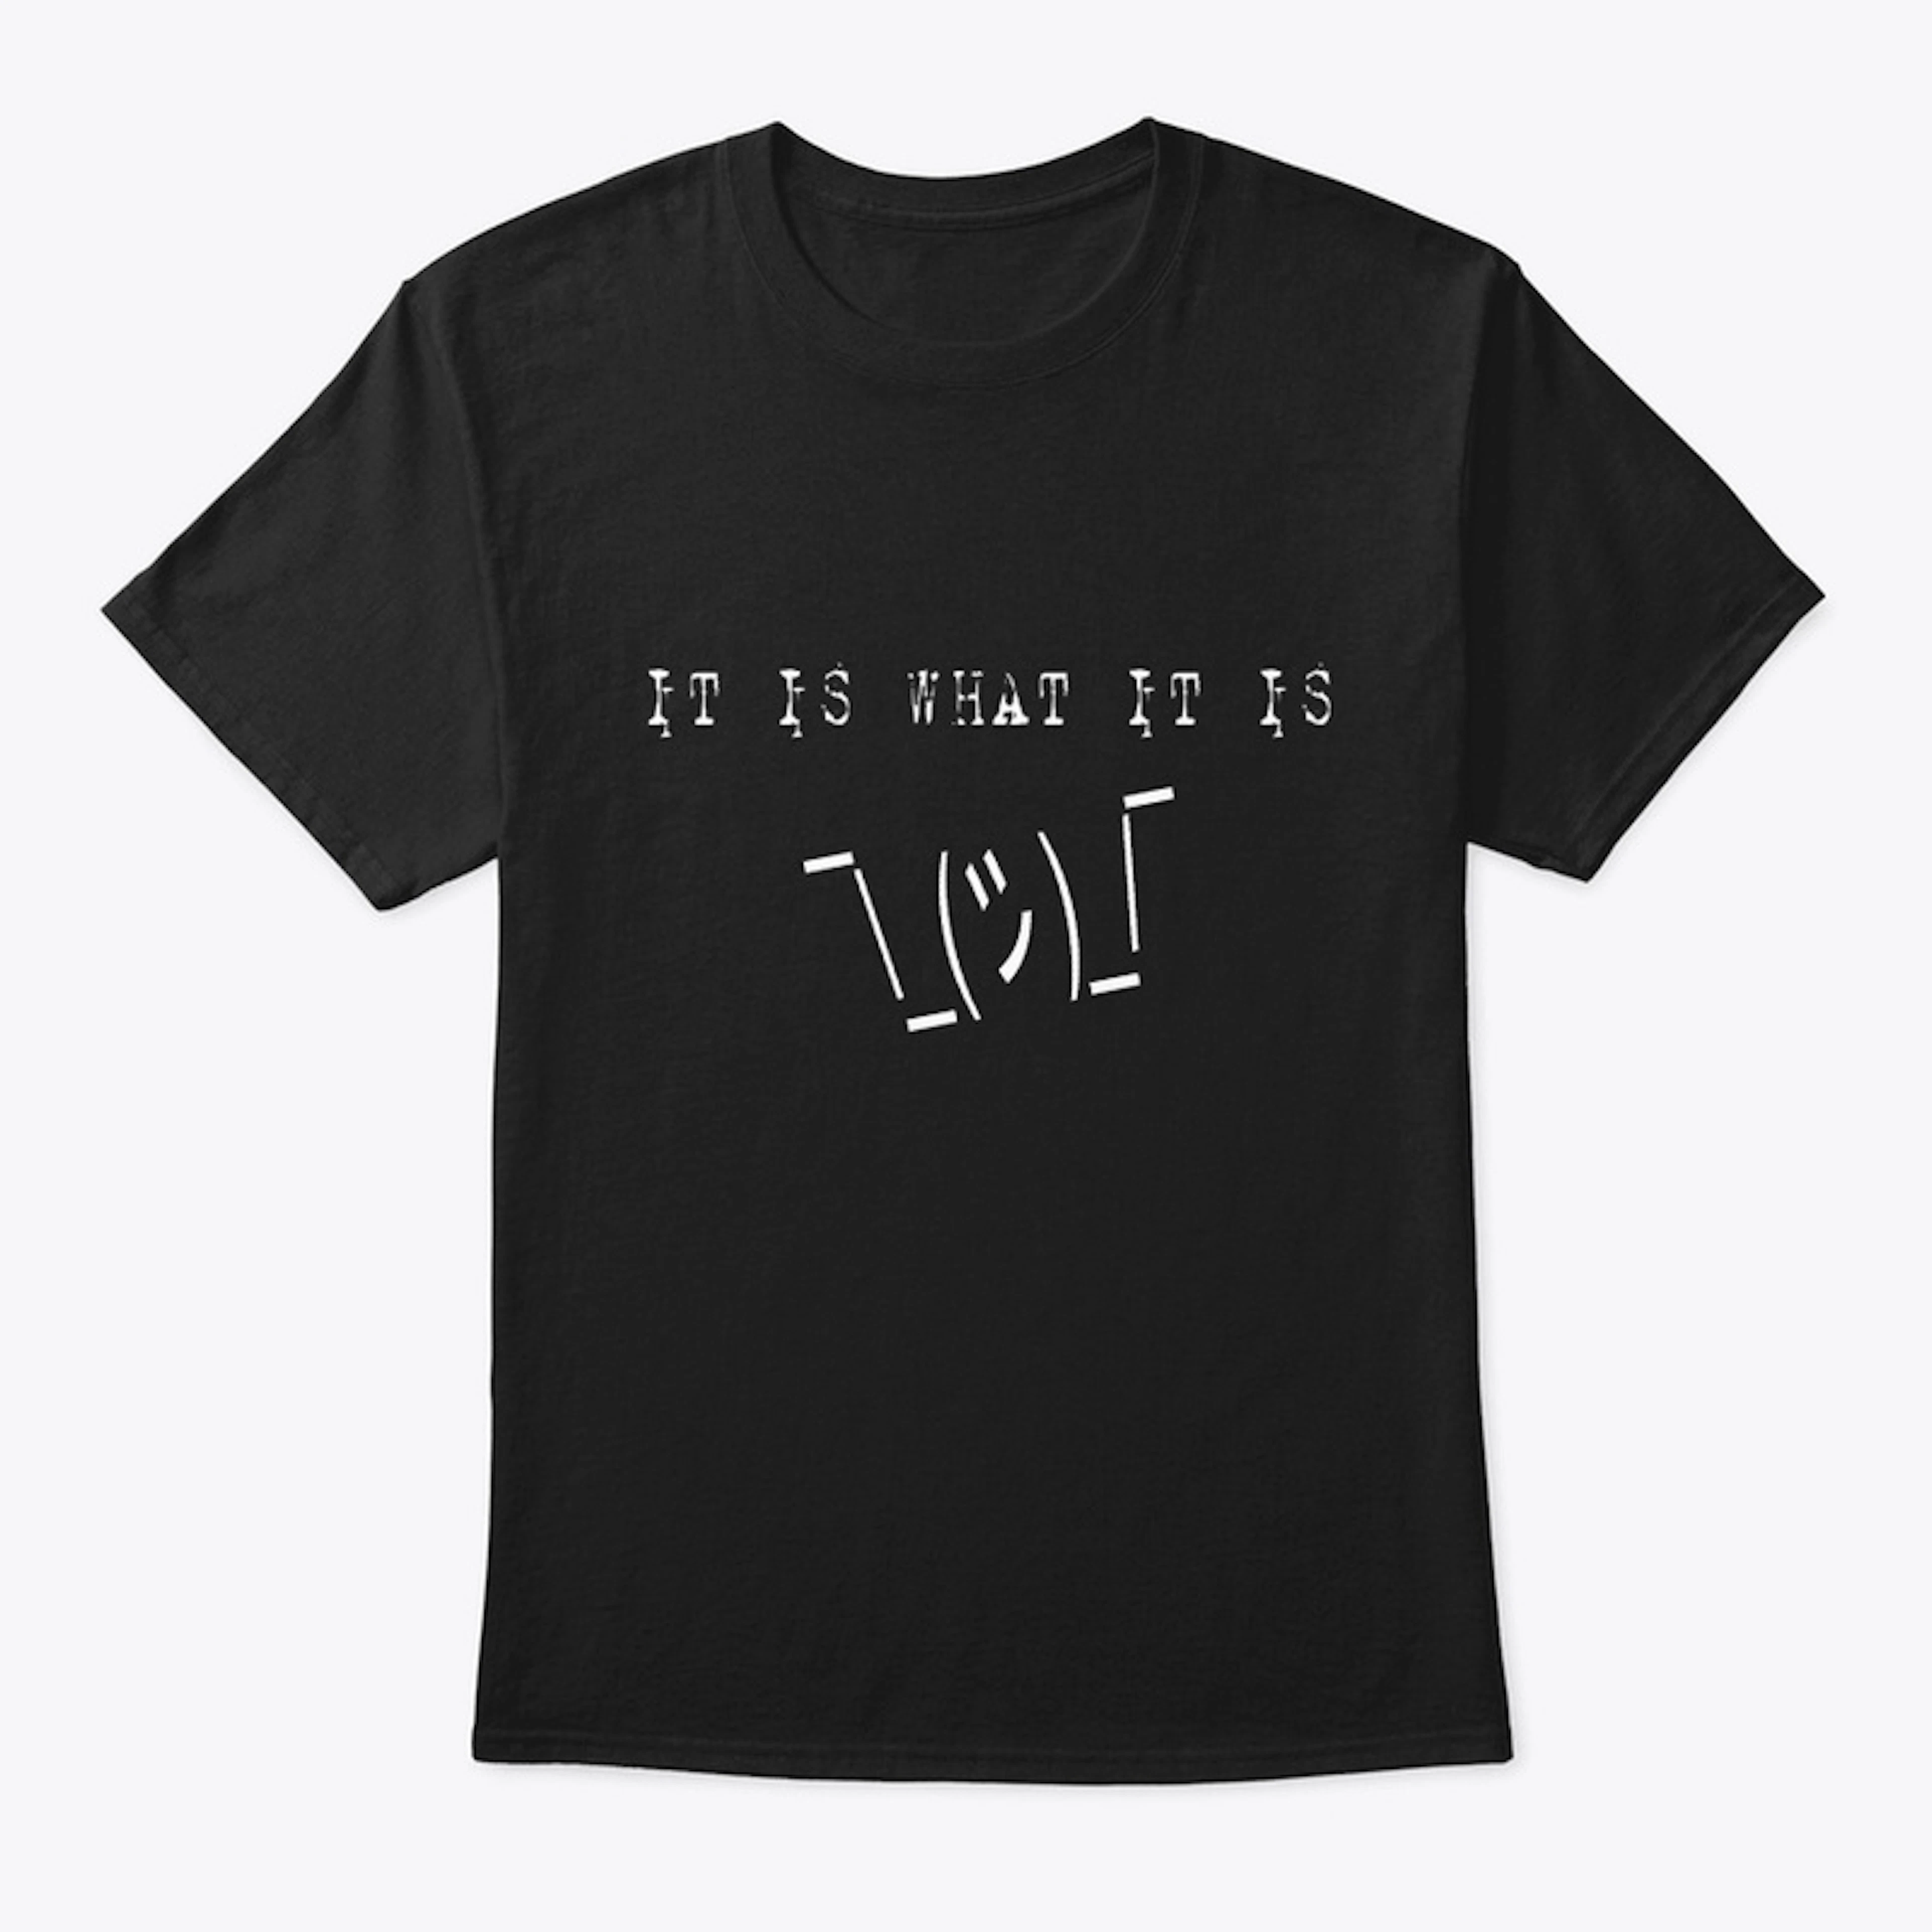 "IIWII" White Letters Tee